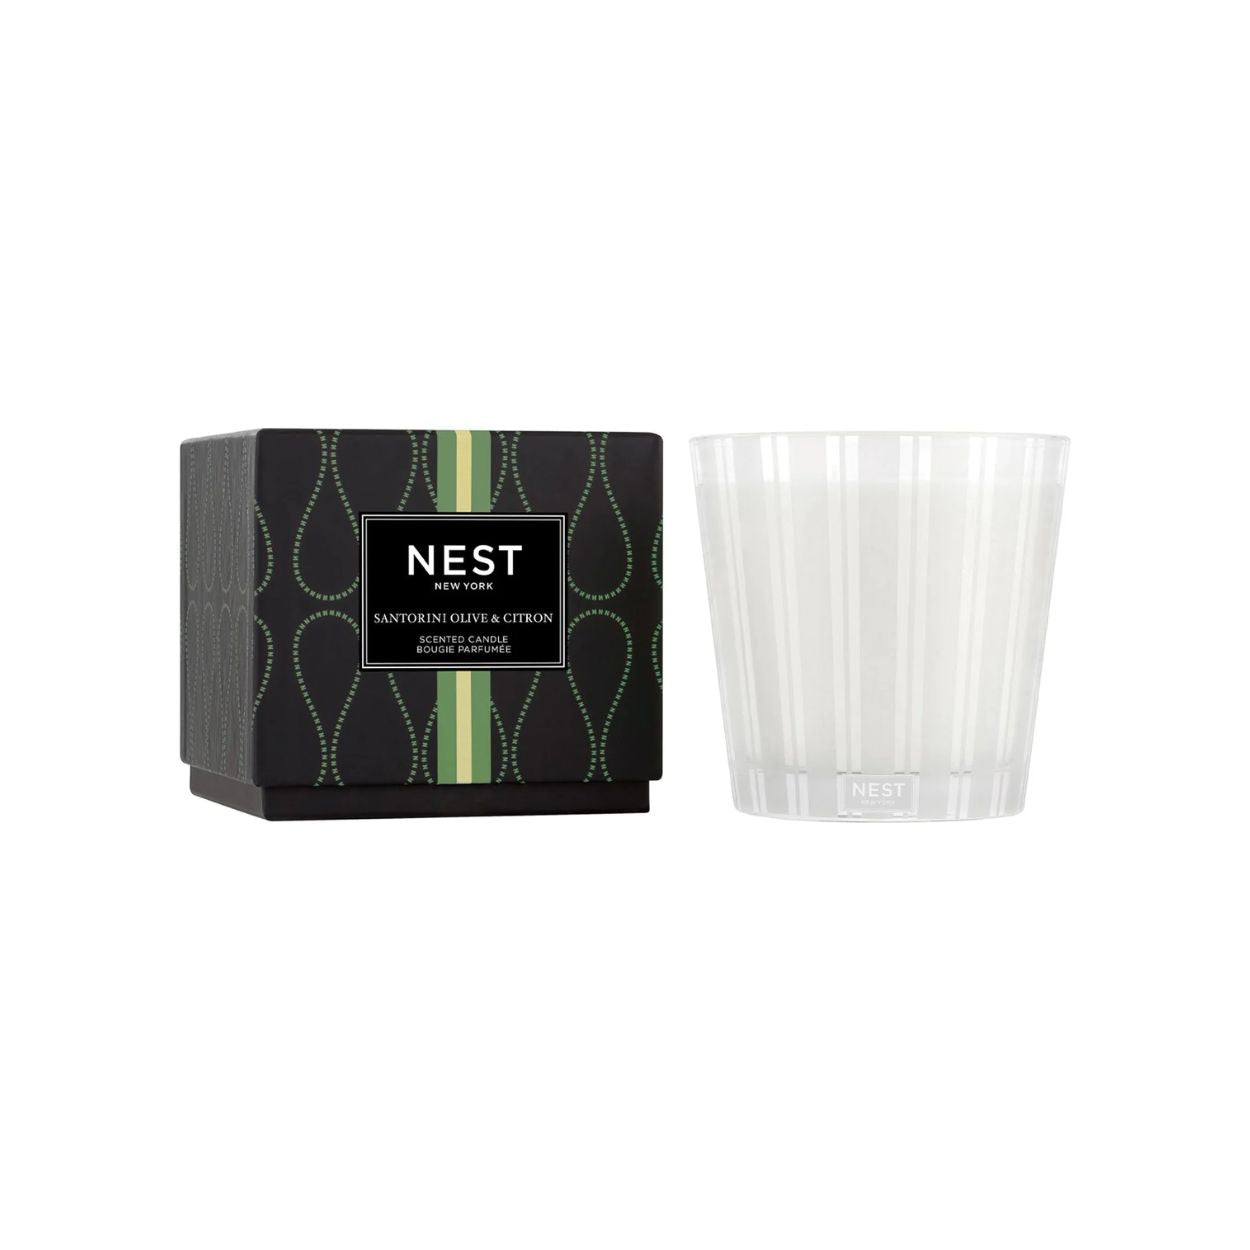 Santorini Olive and Citron Candle